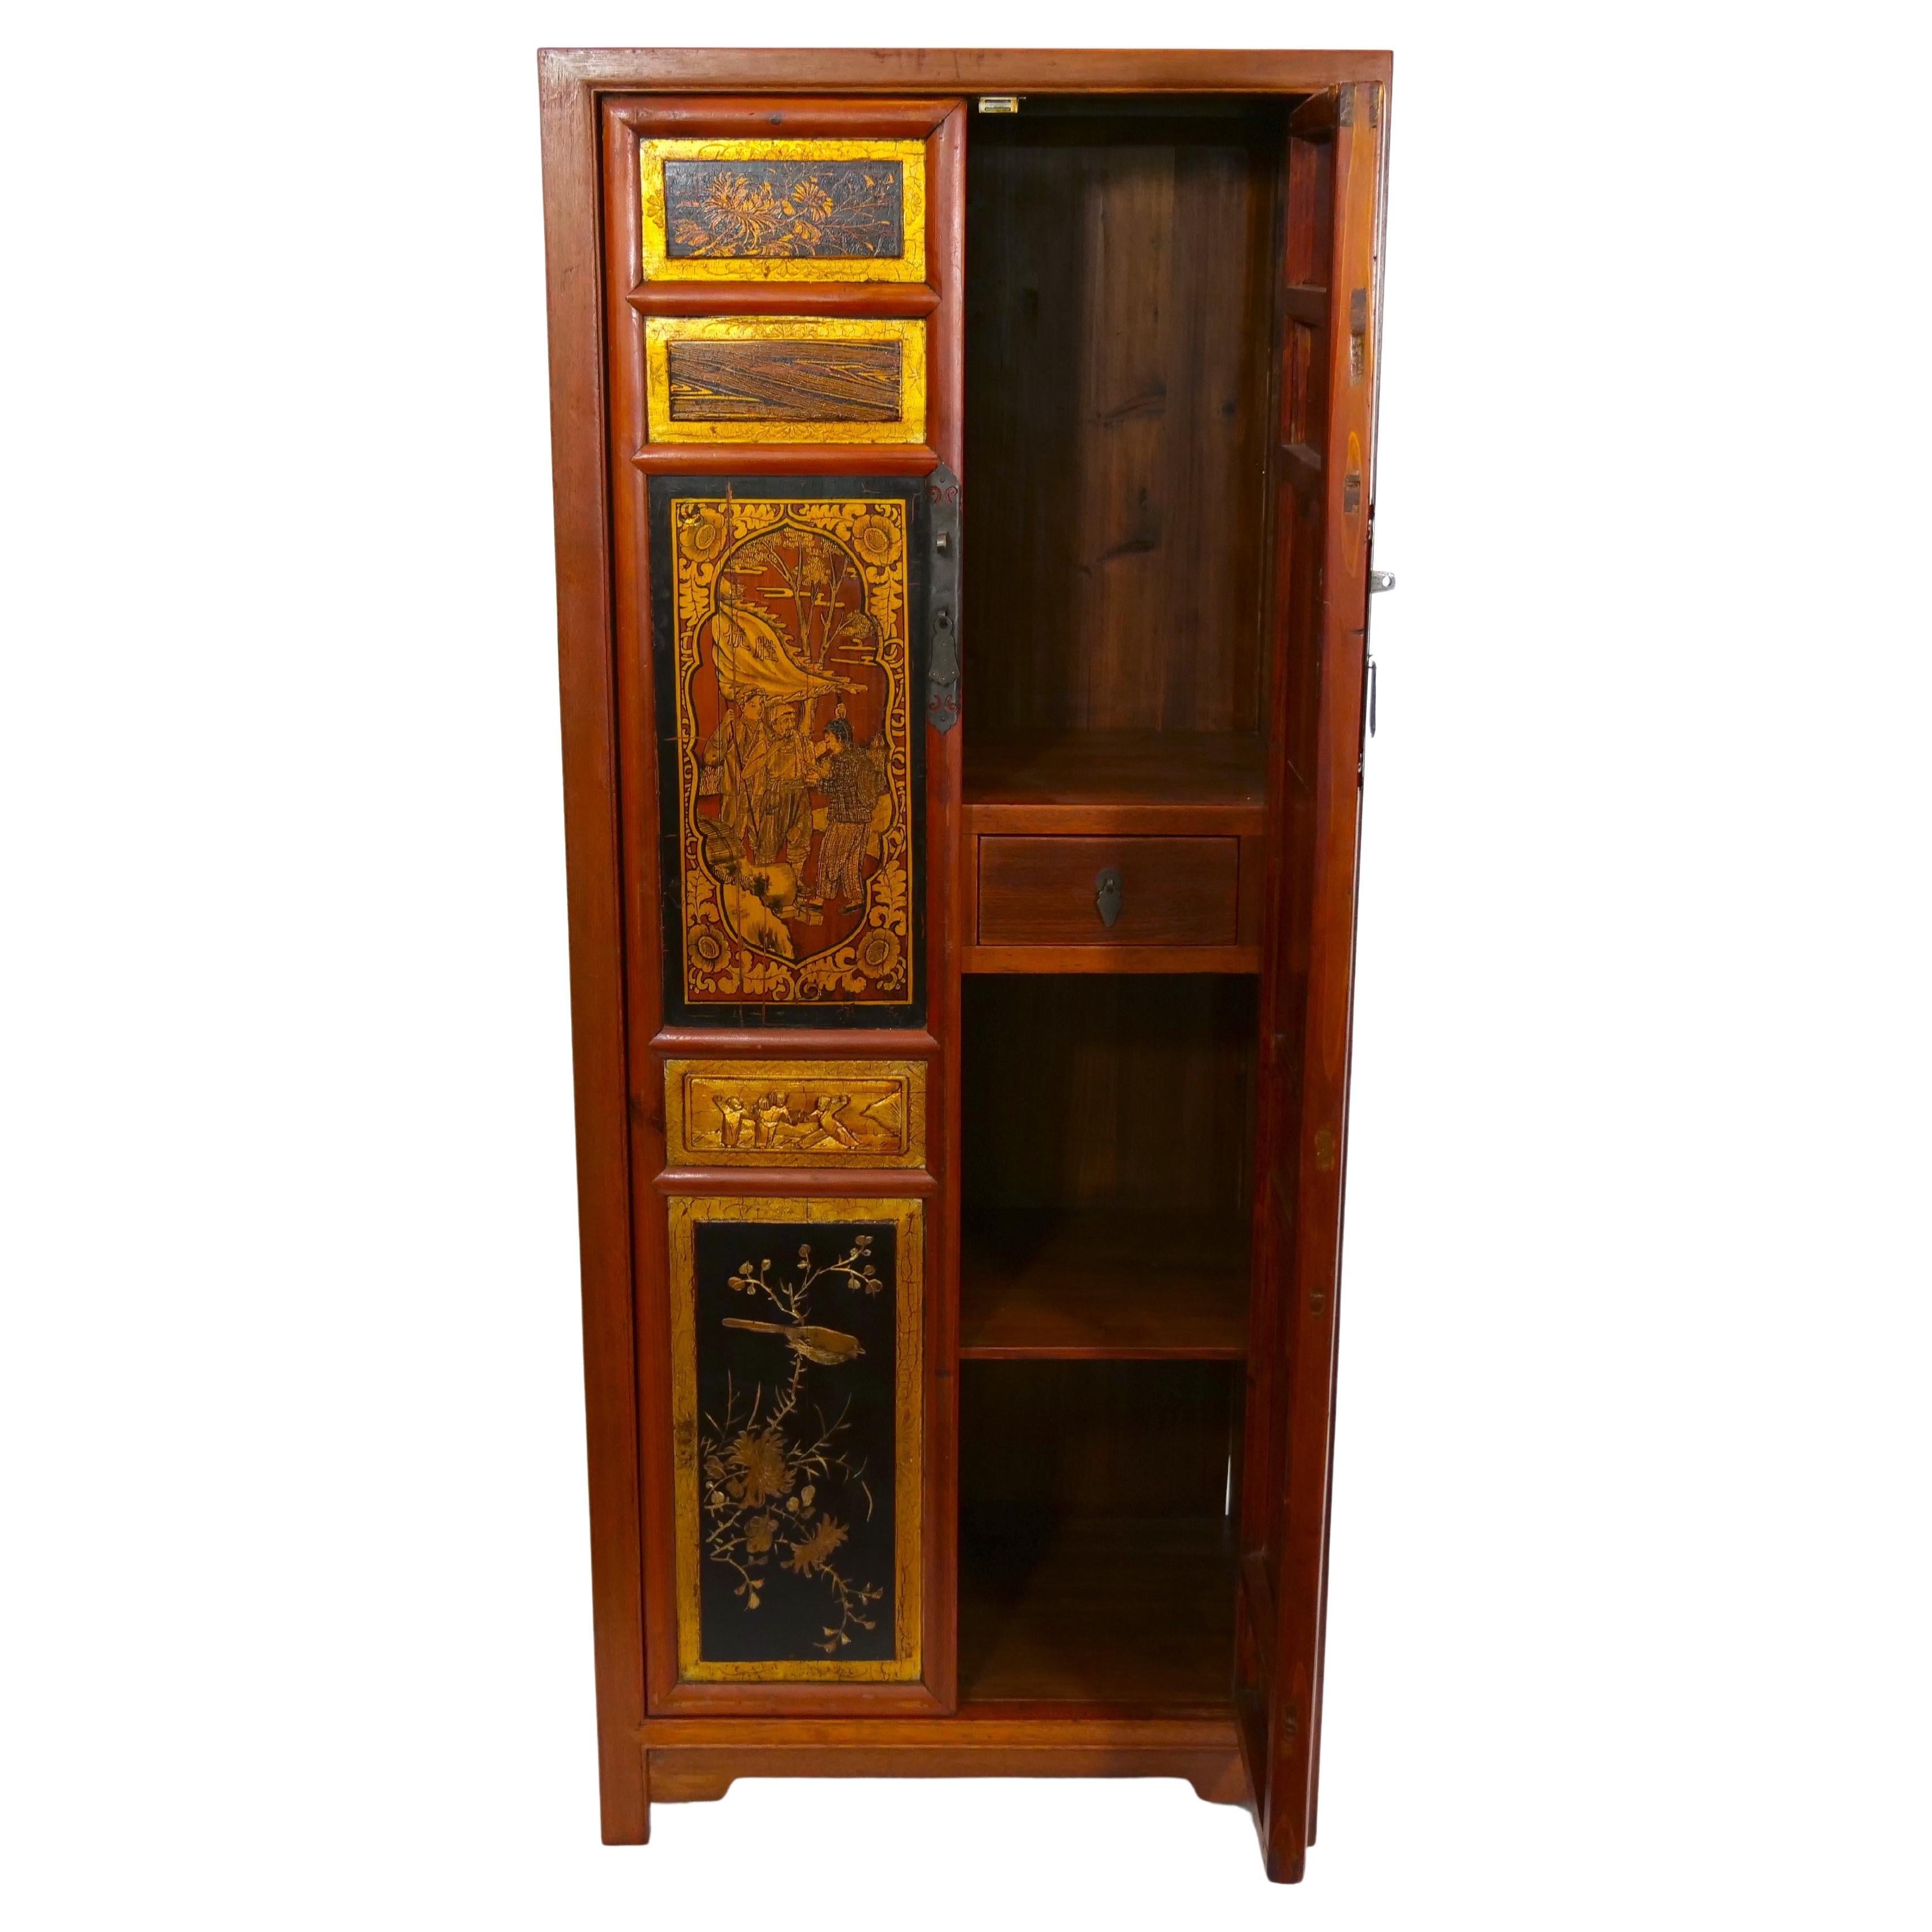 Mid-20th century hand painted red / gilt lacquered wood chinoiserie display cabinet. The cabinet features two front door and two interior pull drawer with different hand painted gilt gold chinoiserie scene, resting on four feet. The cabinet is in